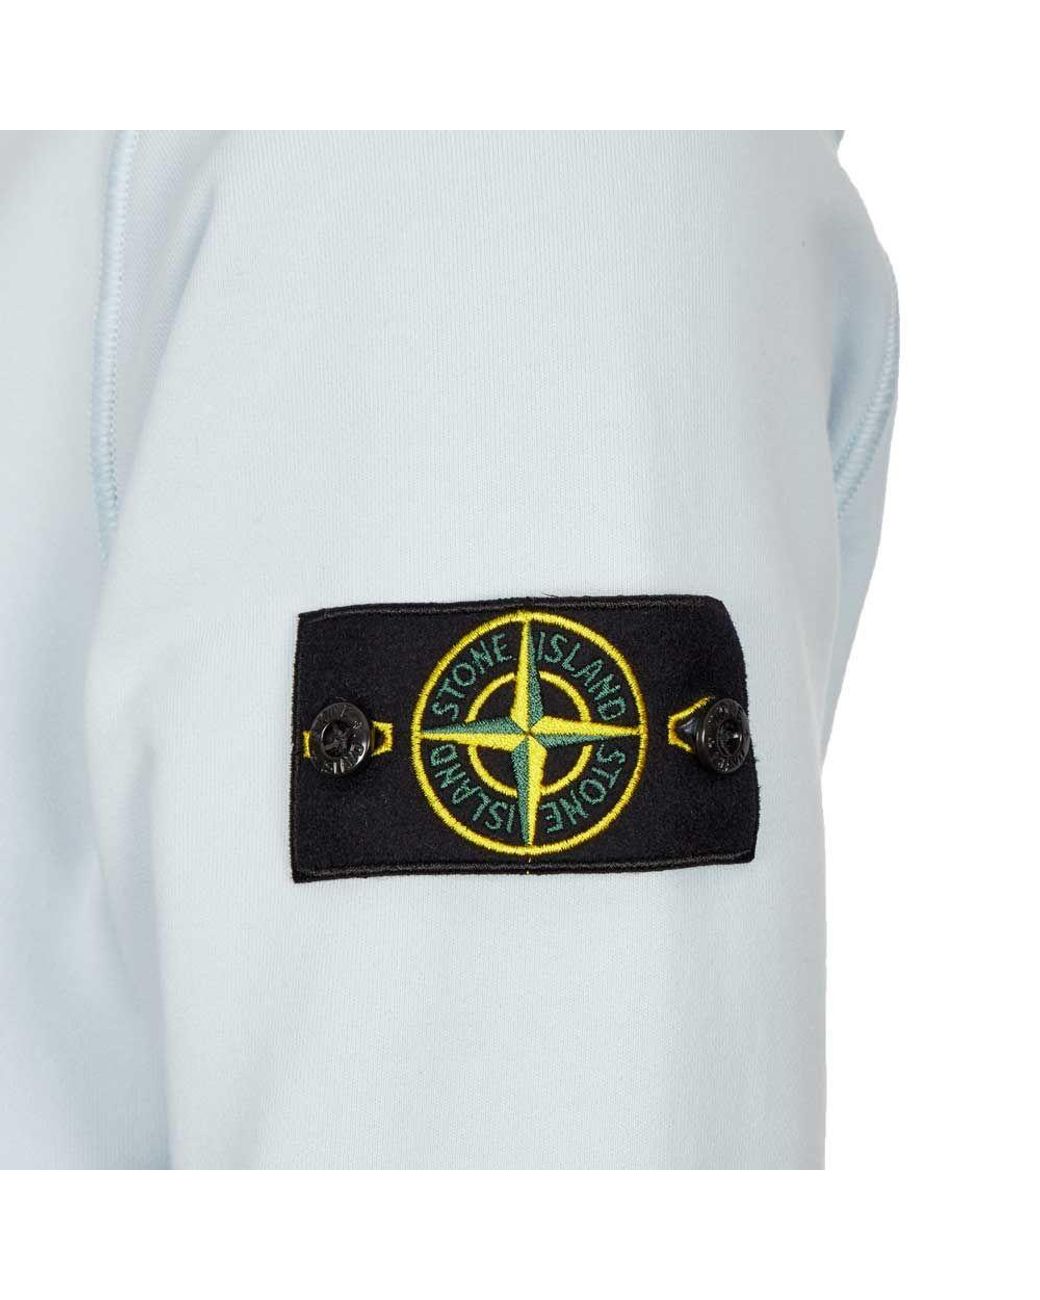 Stone Island Cotton Hoodie in Blue for Men | Lyst Canada